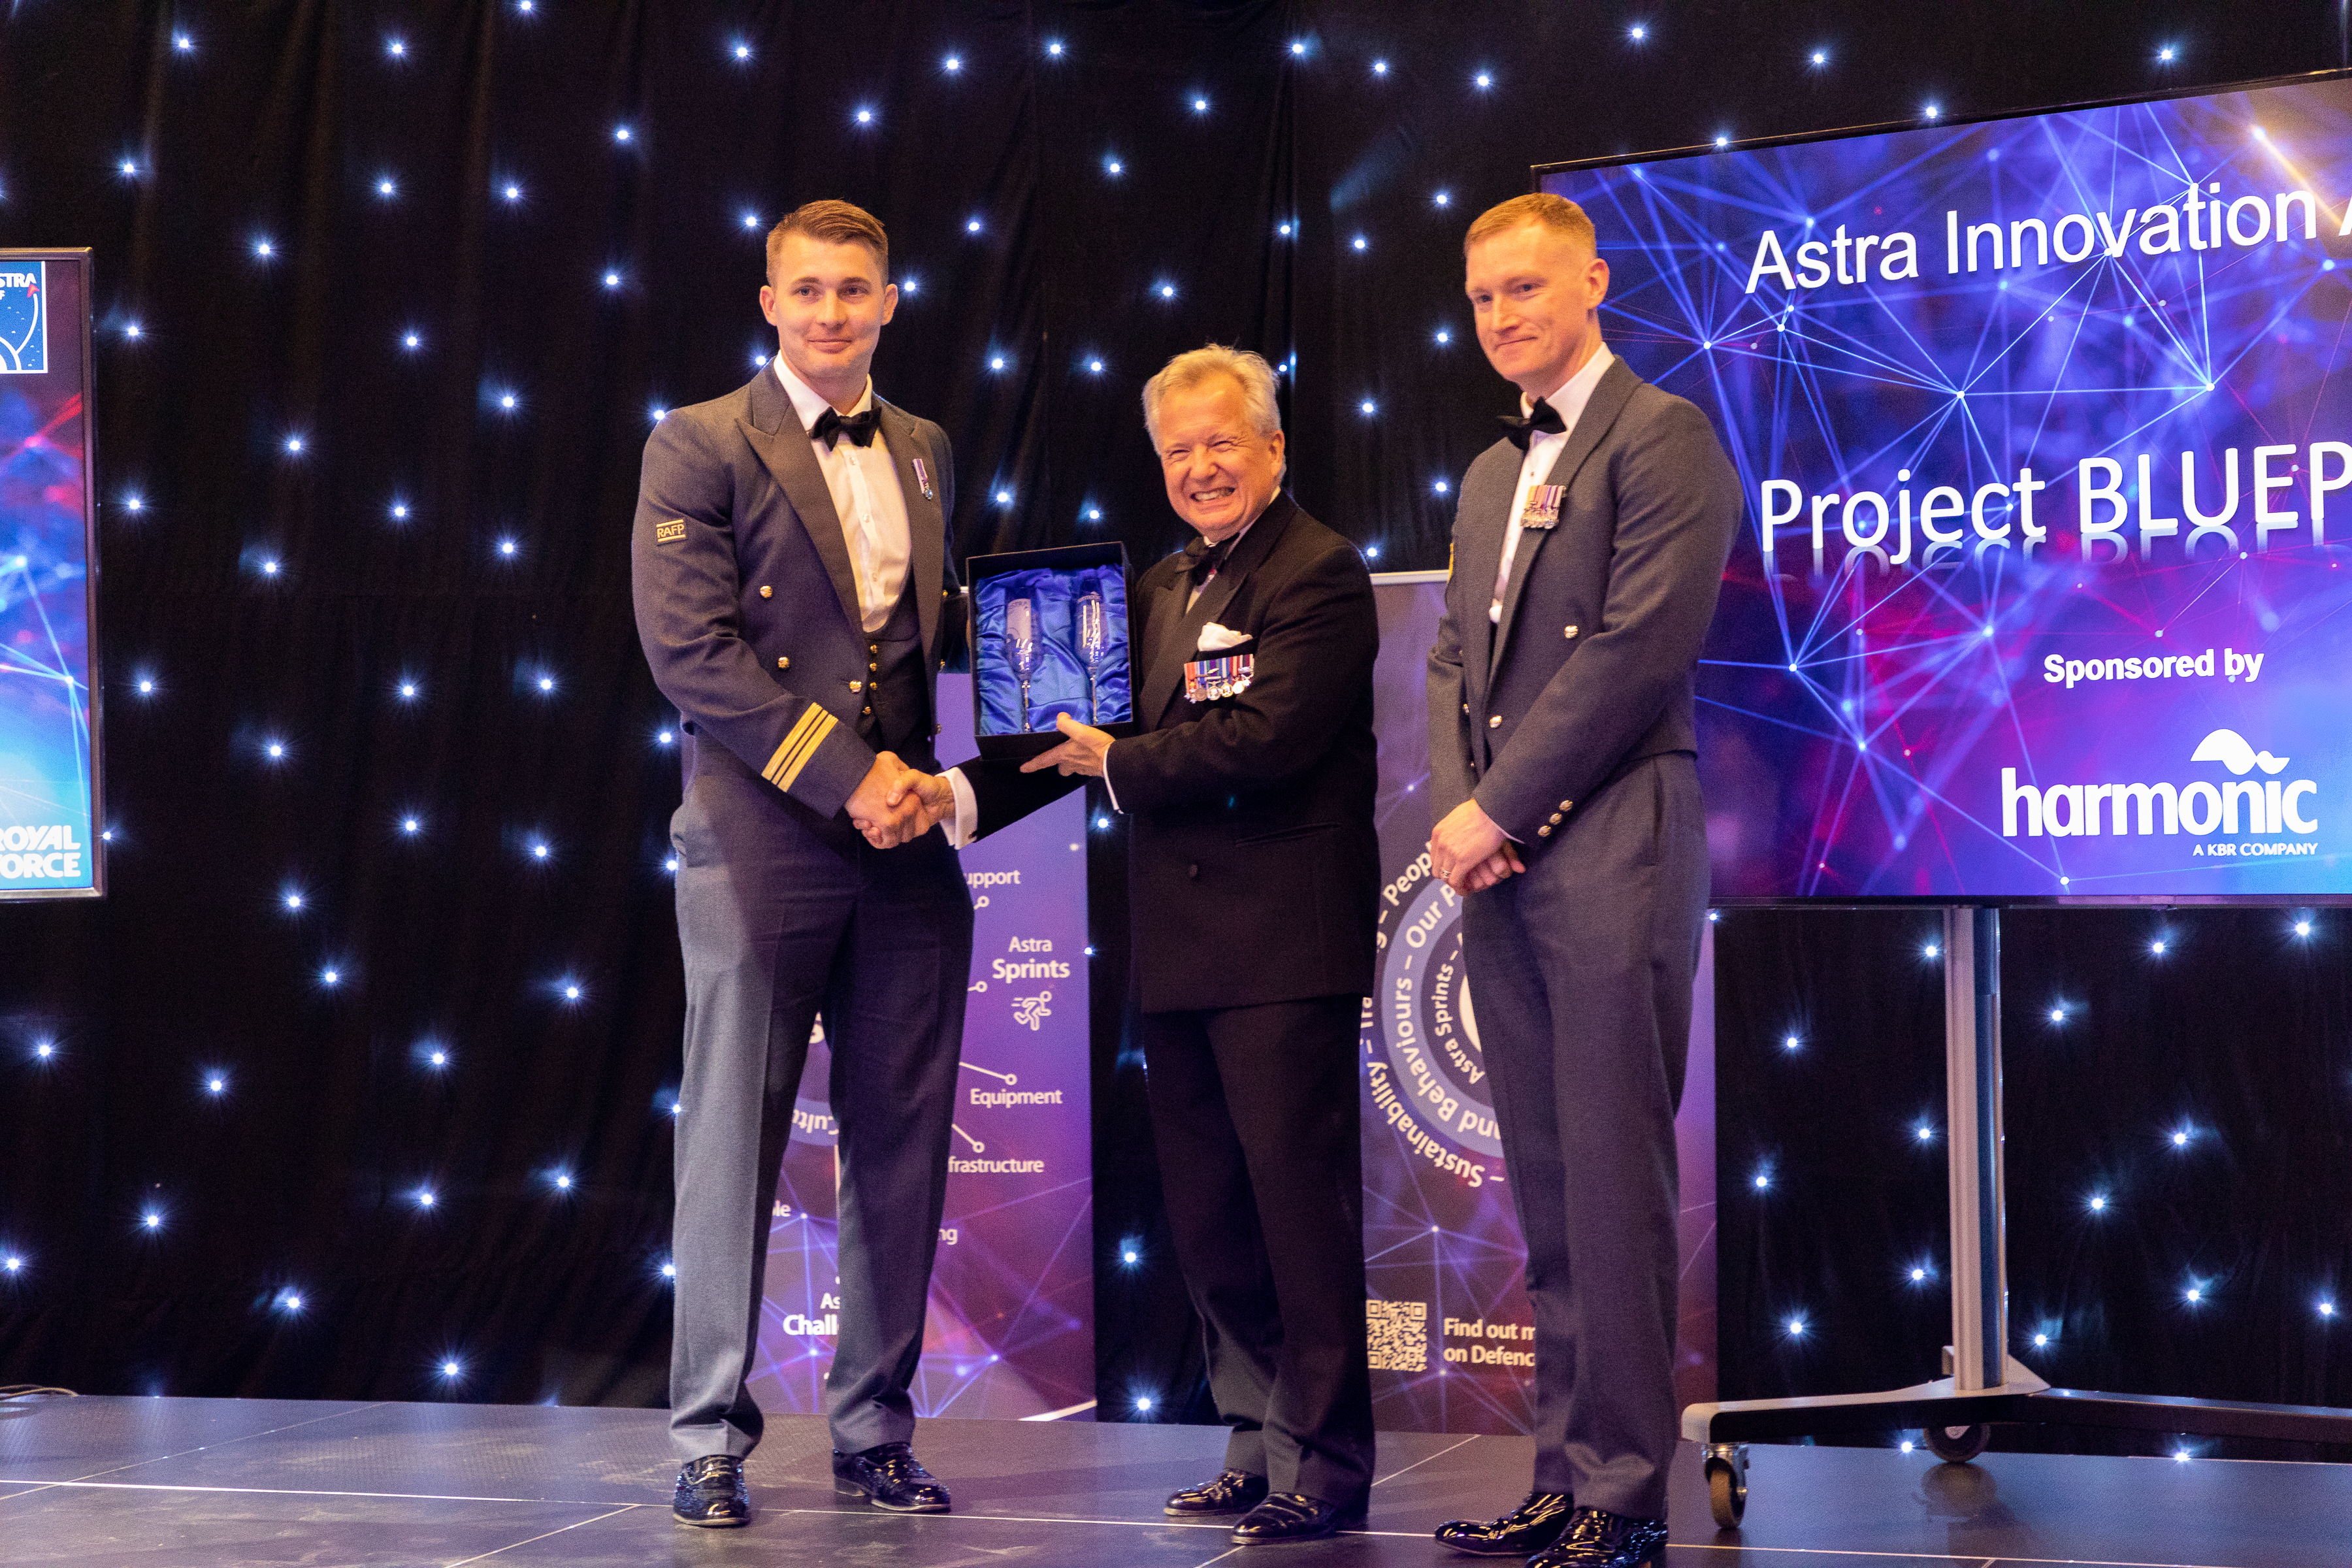 Squadron Leader John Barrowcliff and Fligth Sergeant Si Ball being presented with the Astra Innovation Award